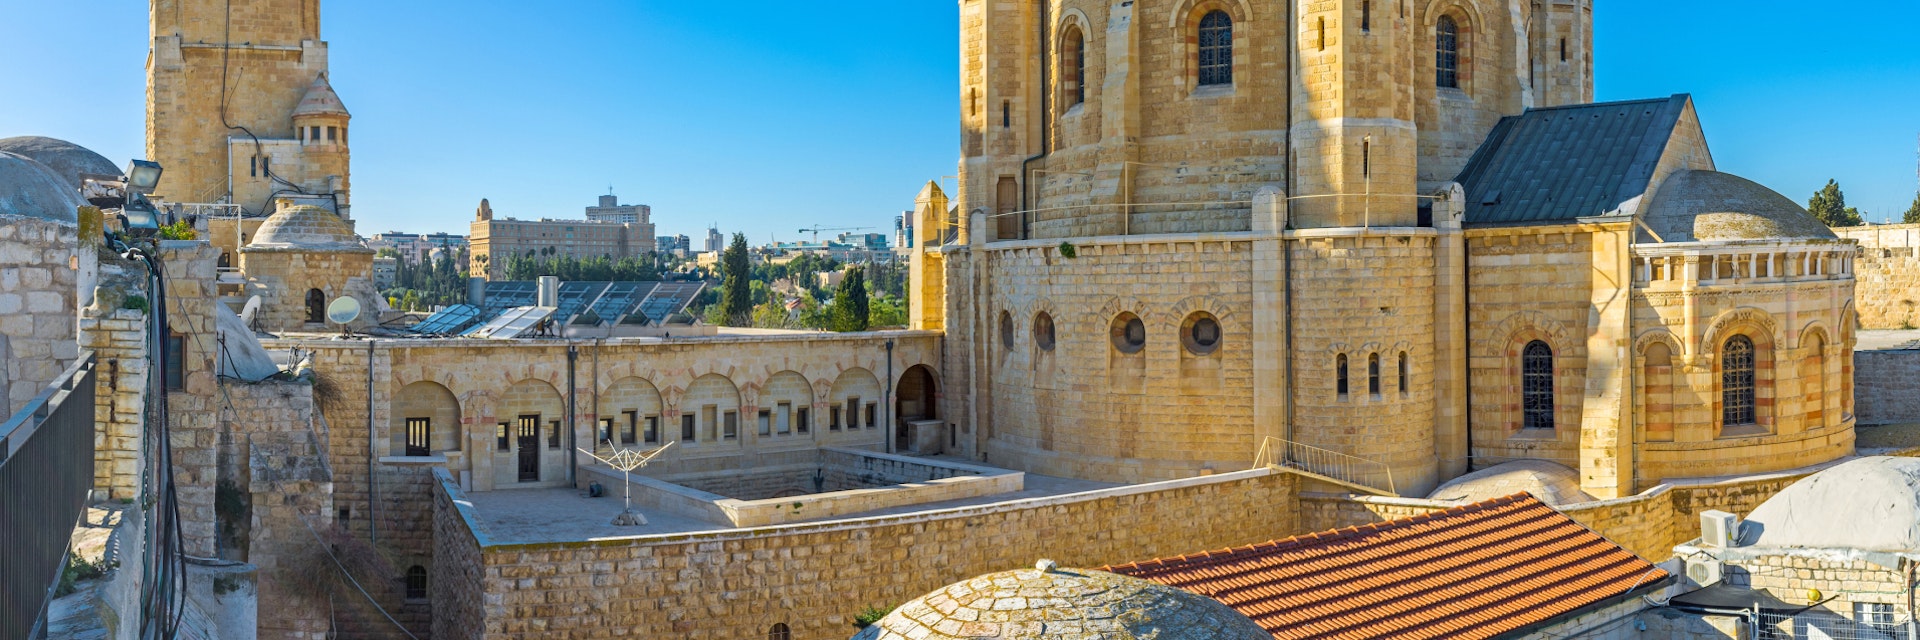 The house roofs are the best viewpoint, overlooking the huge building of the Dormition Abbey, with its clock tower and tiny belfries, Jerusalem, Israel.